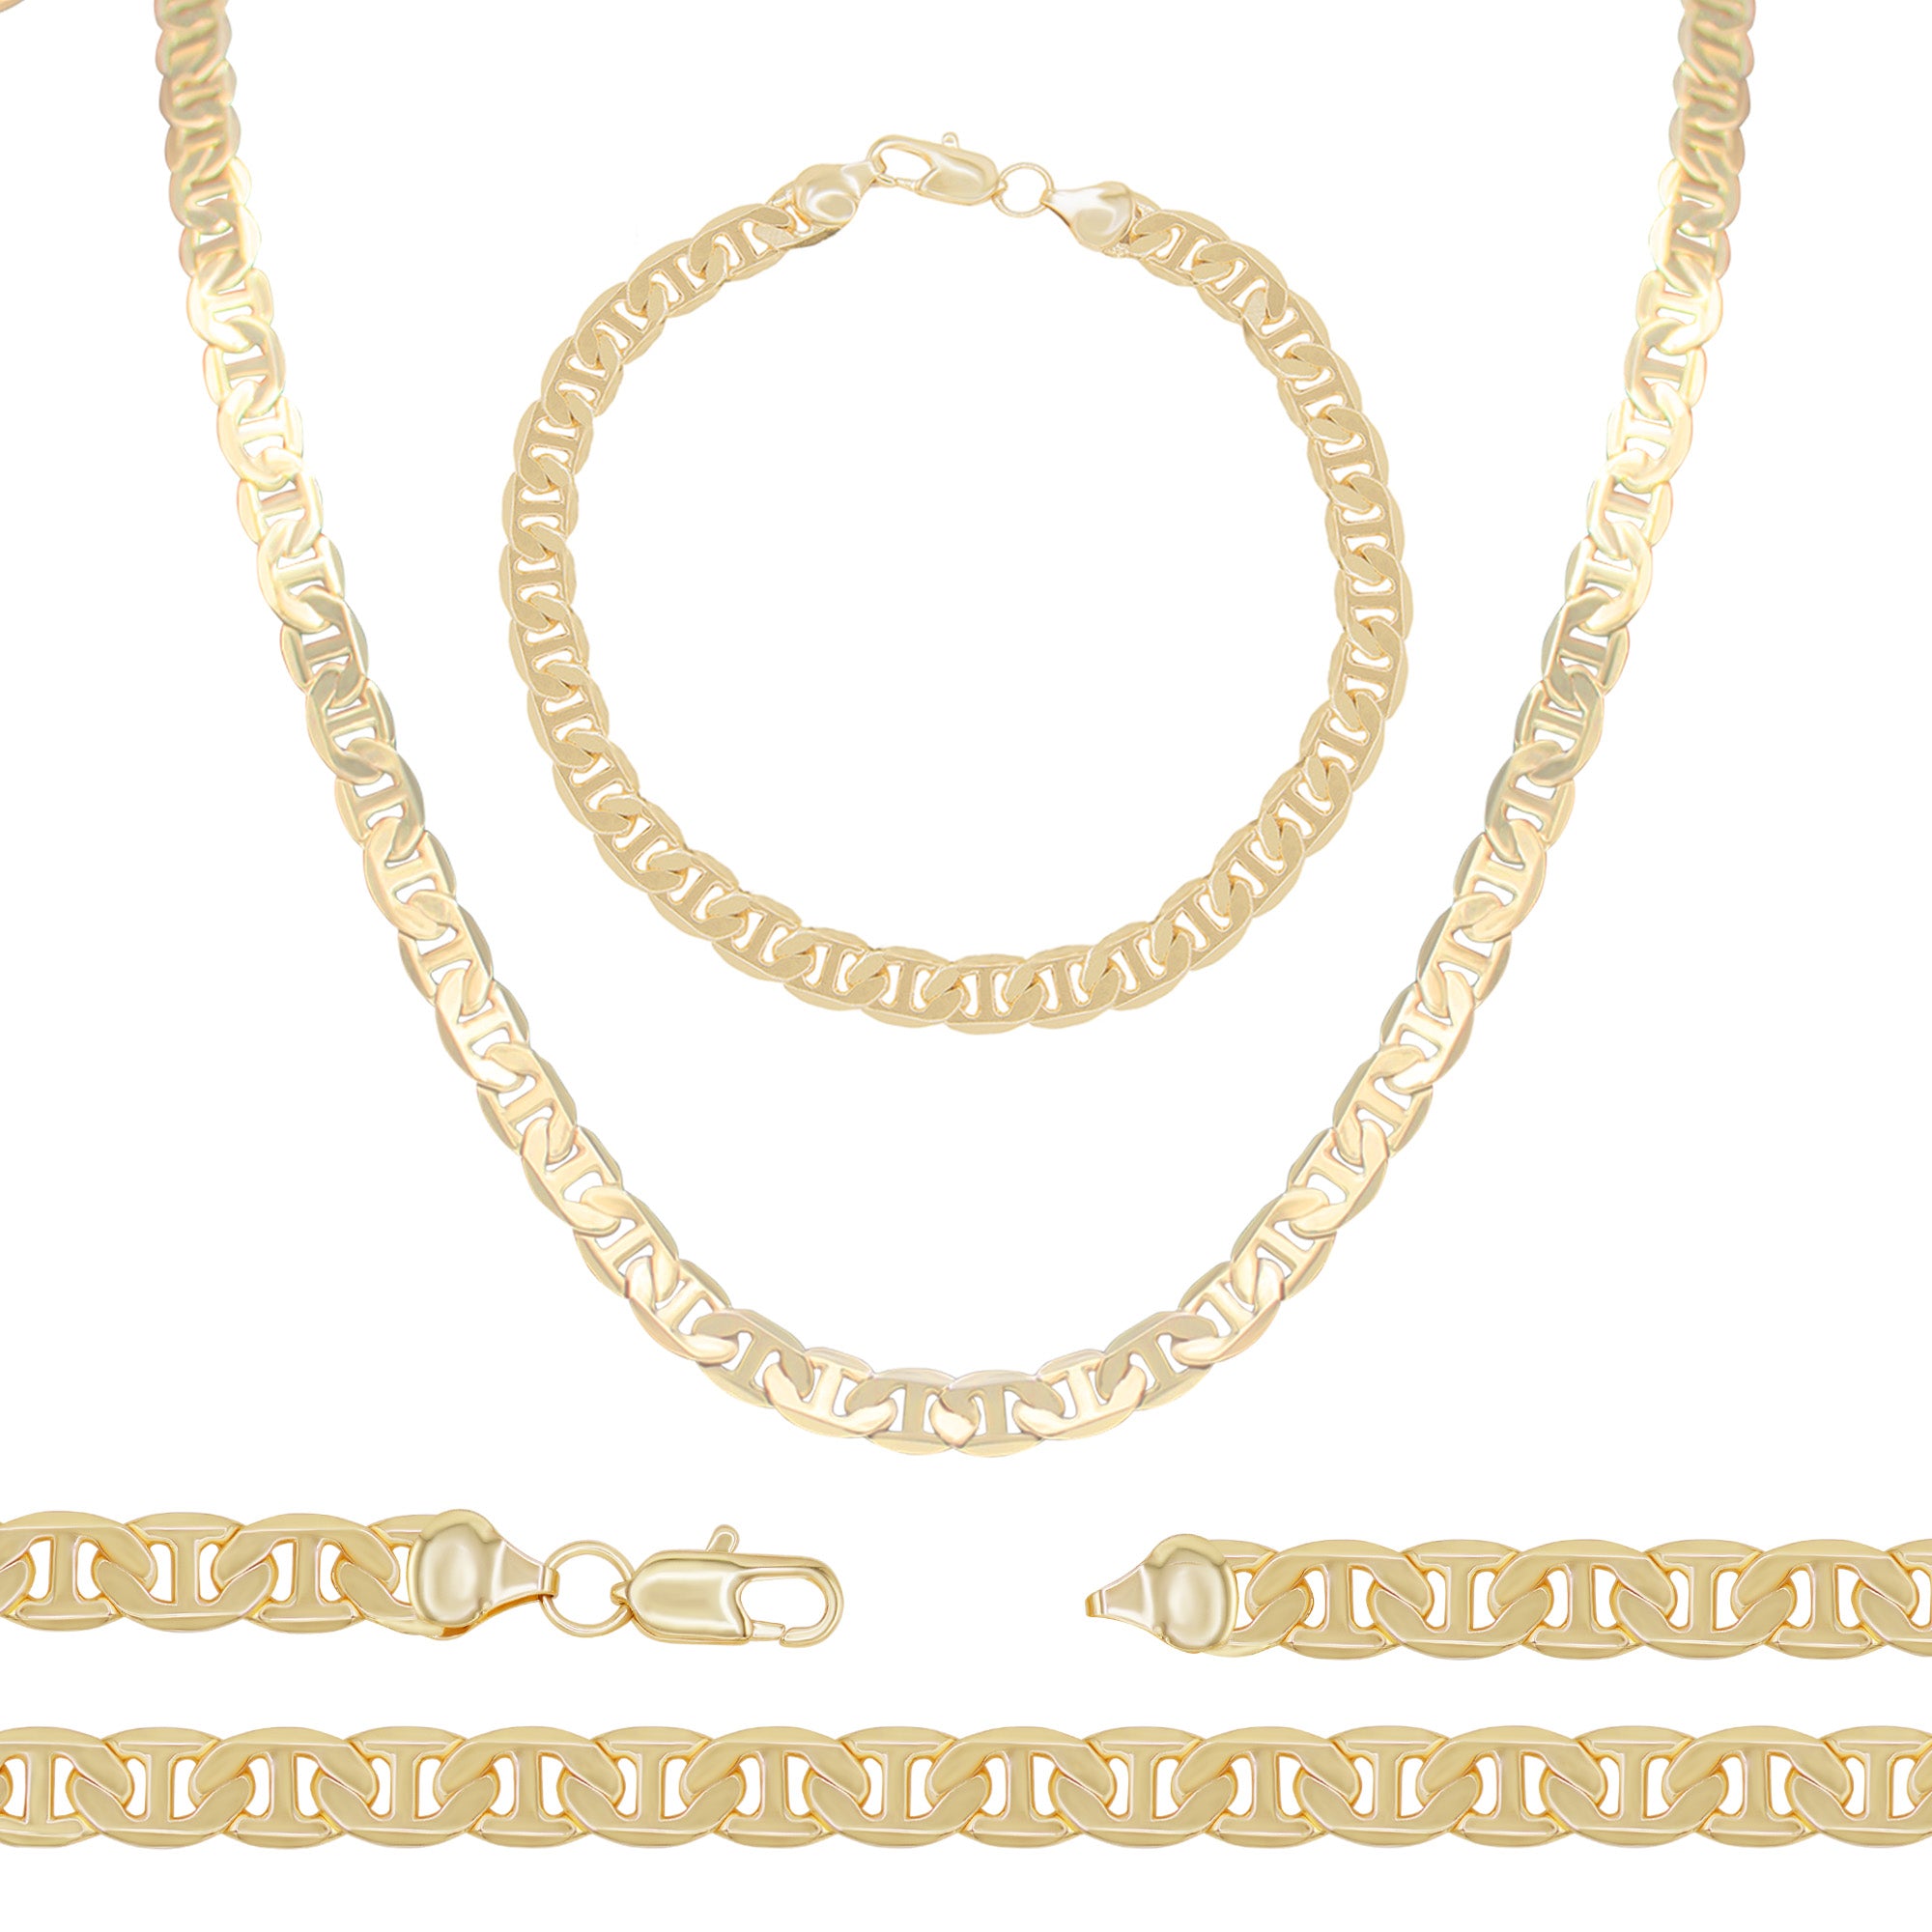 Anchor / Mariner Chain Link Necklace 14K Yellow Gold 2 1/4